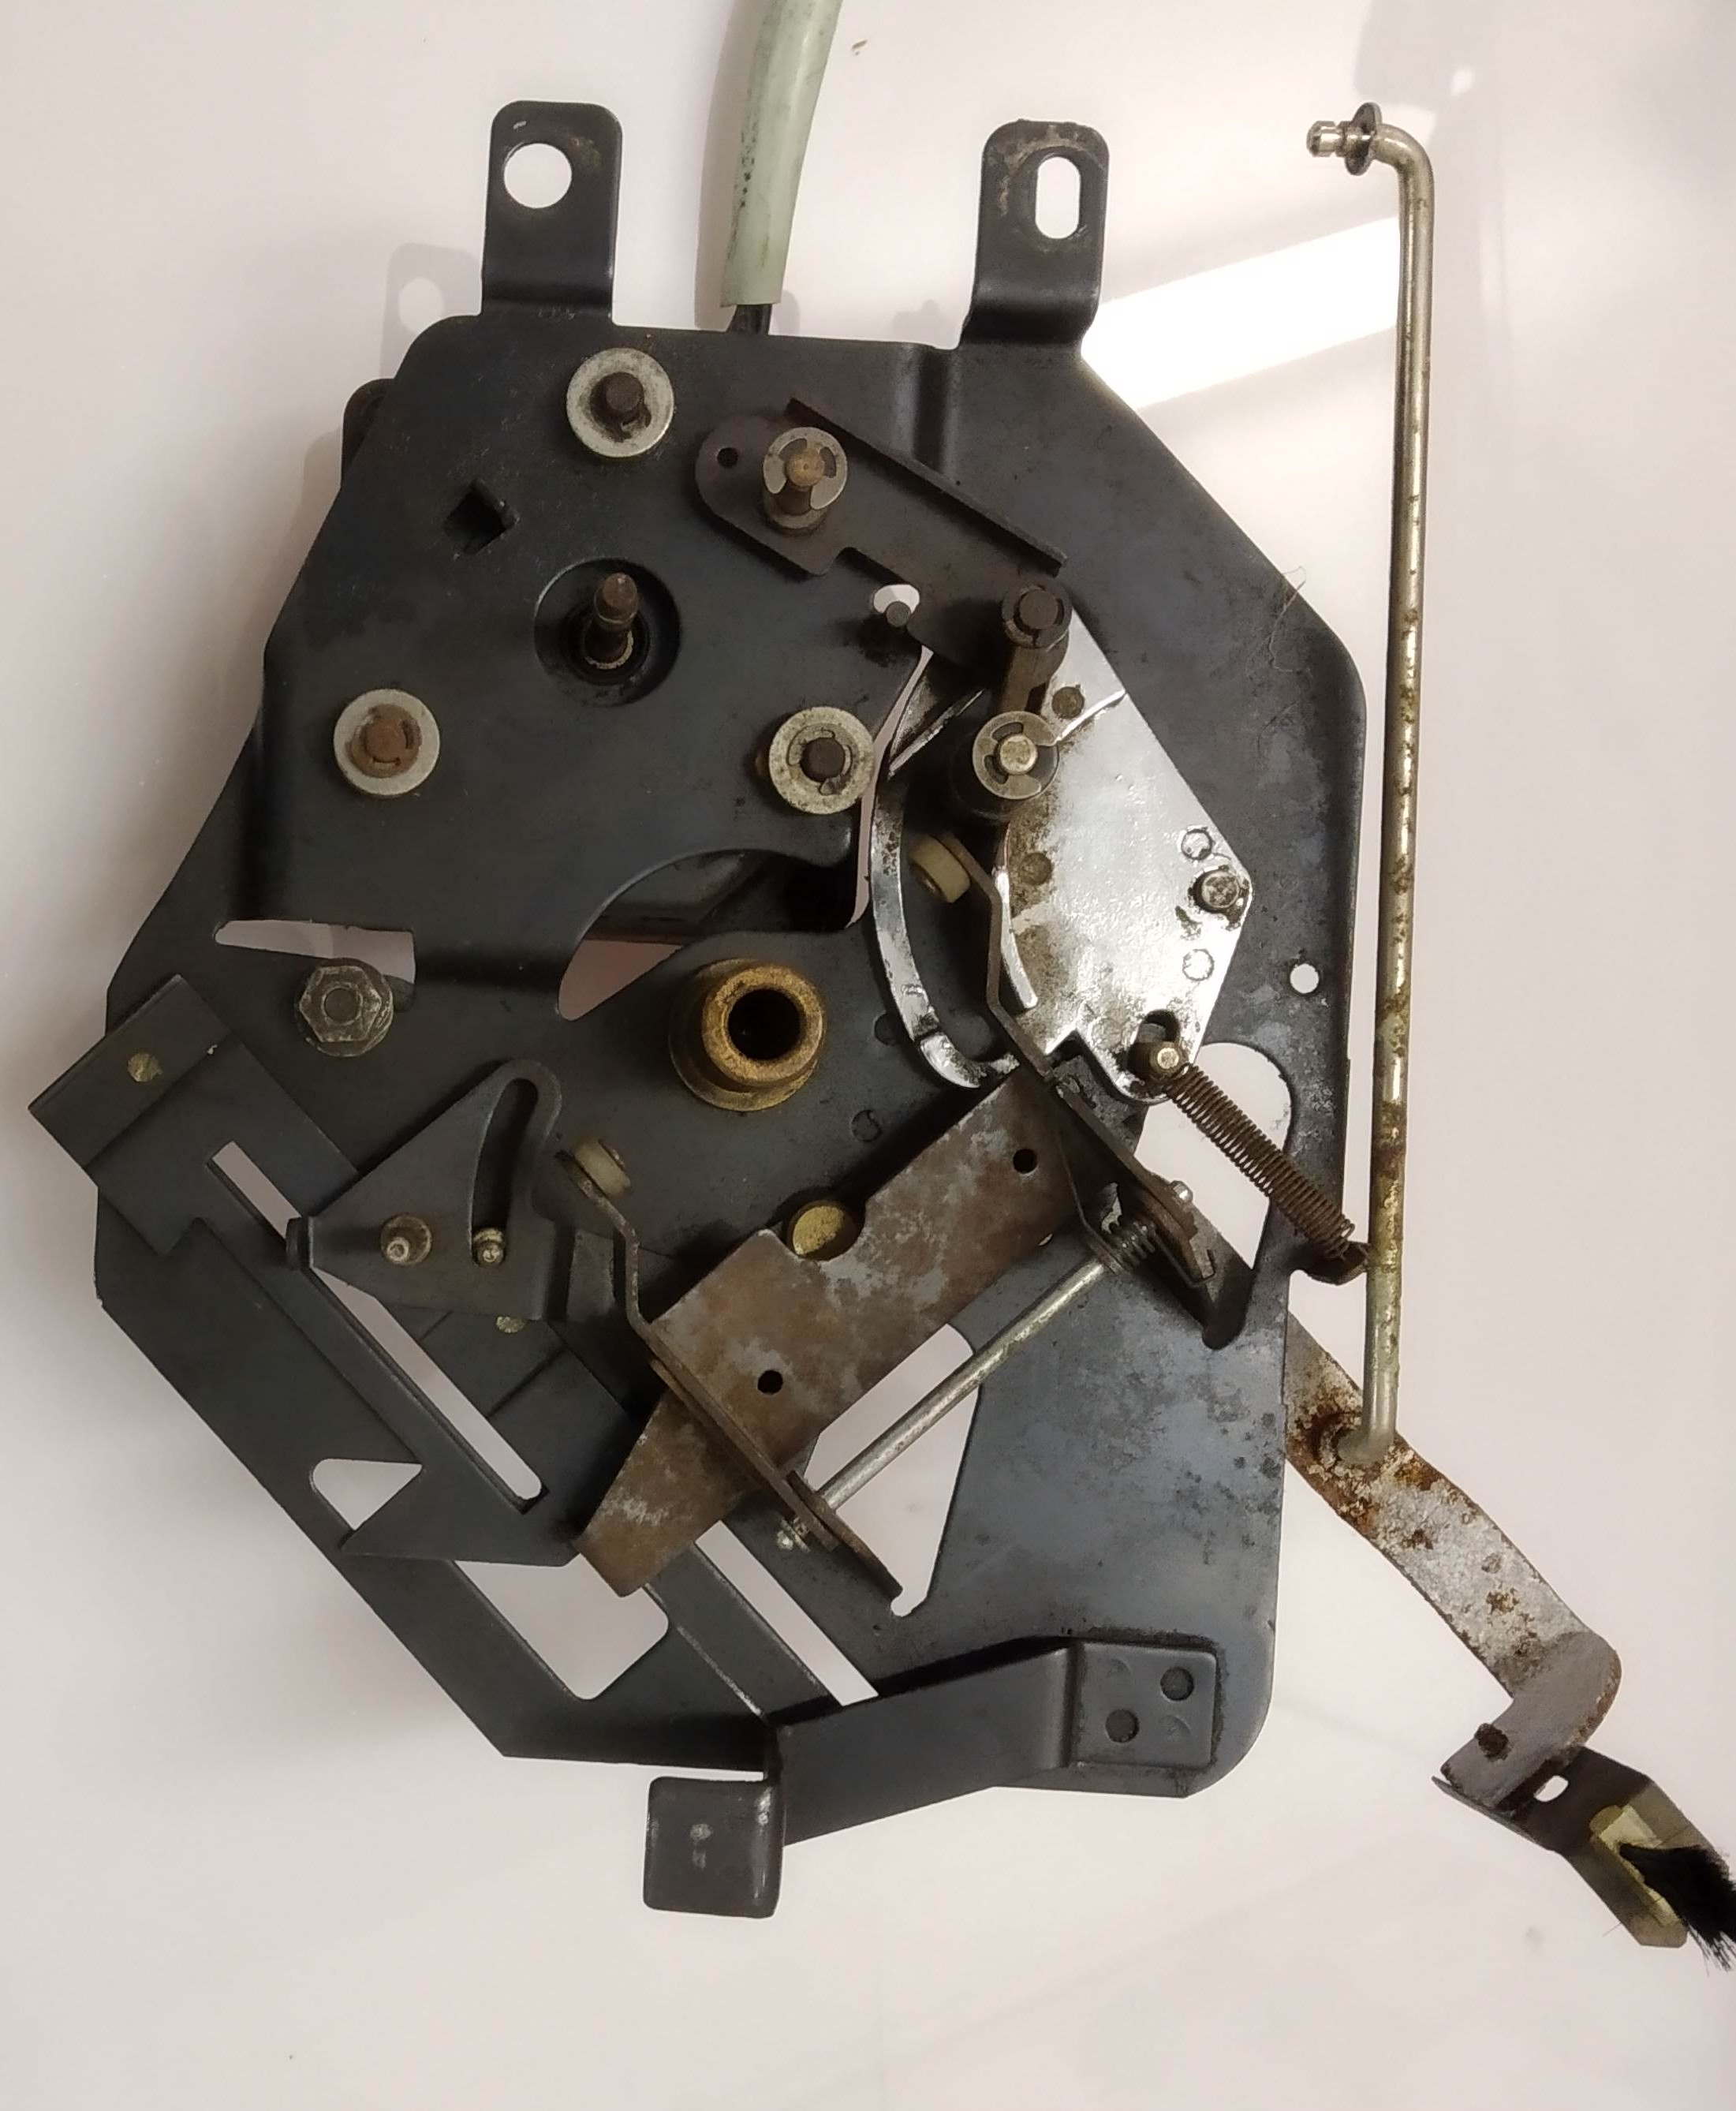 Turntable motor and bracket assembly